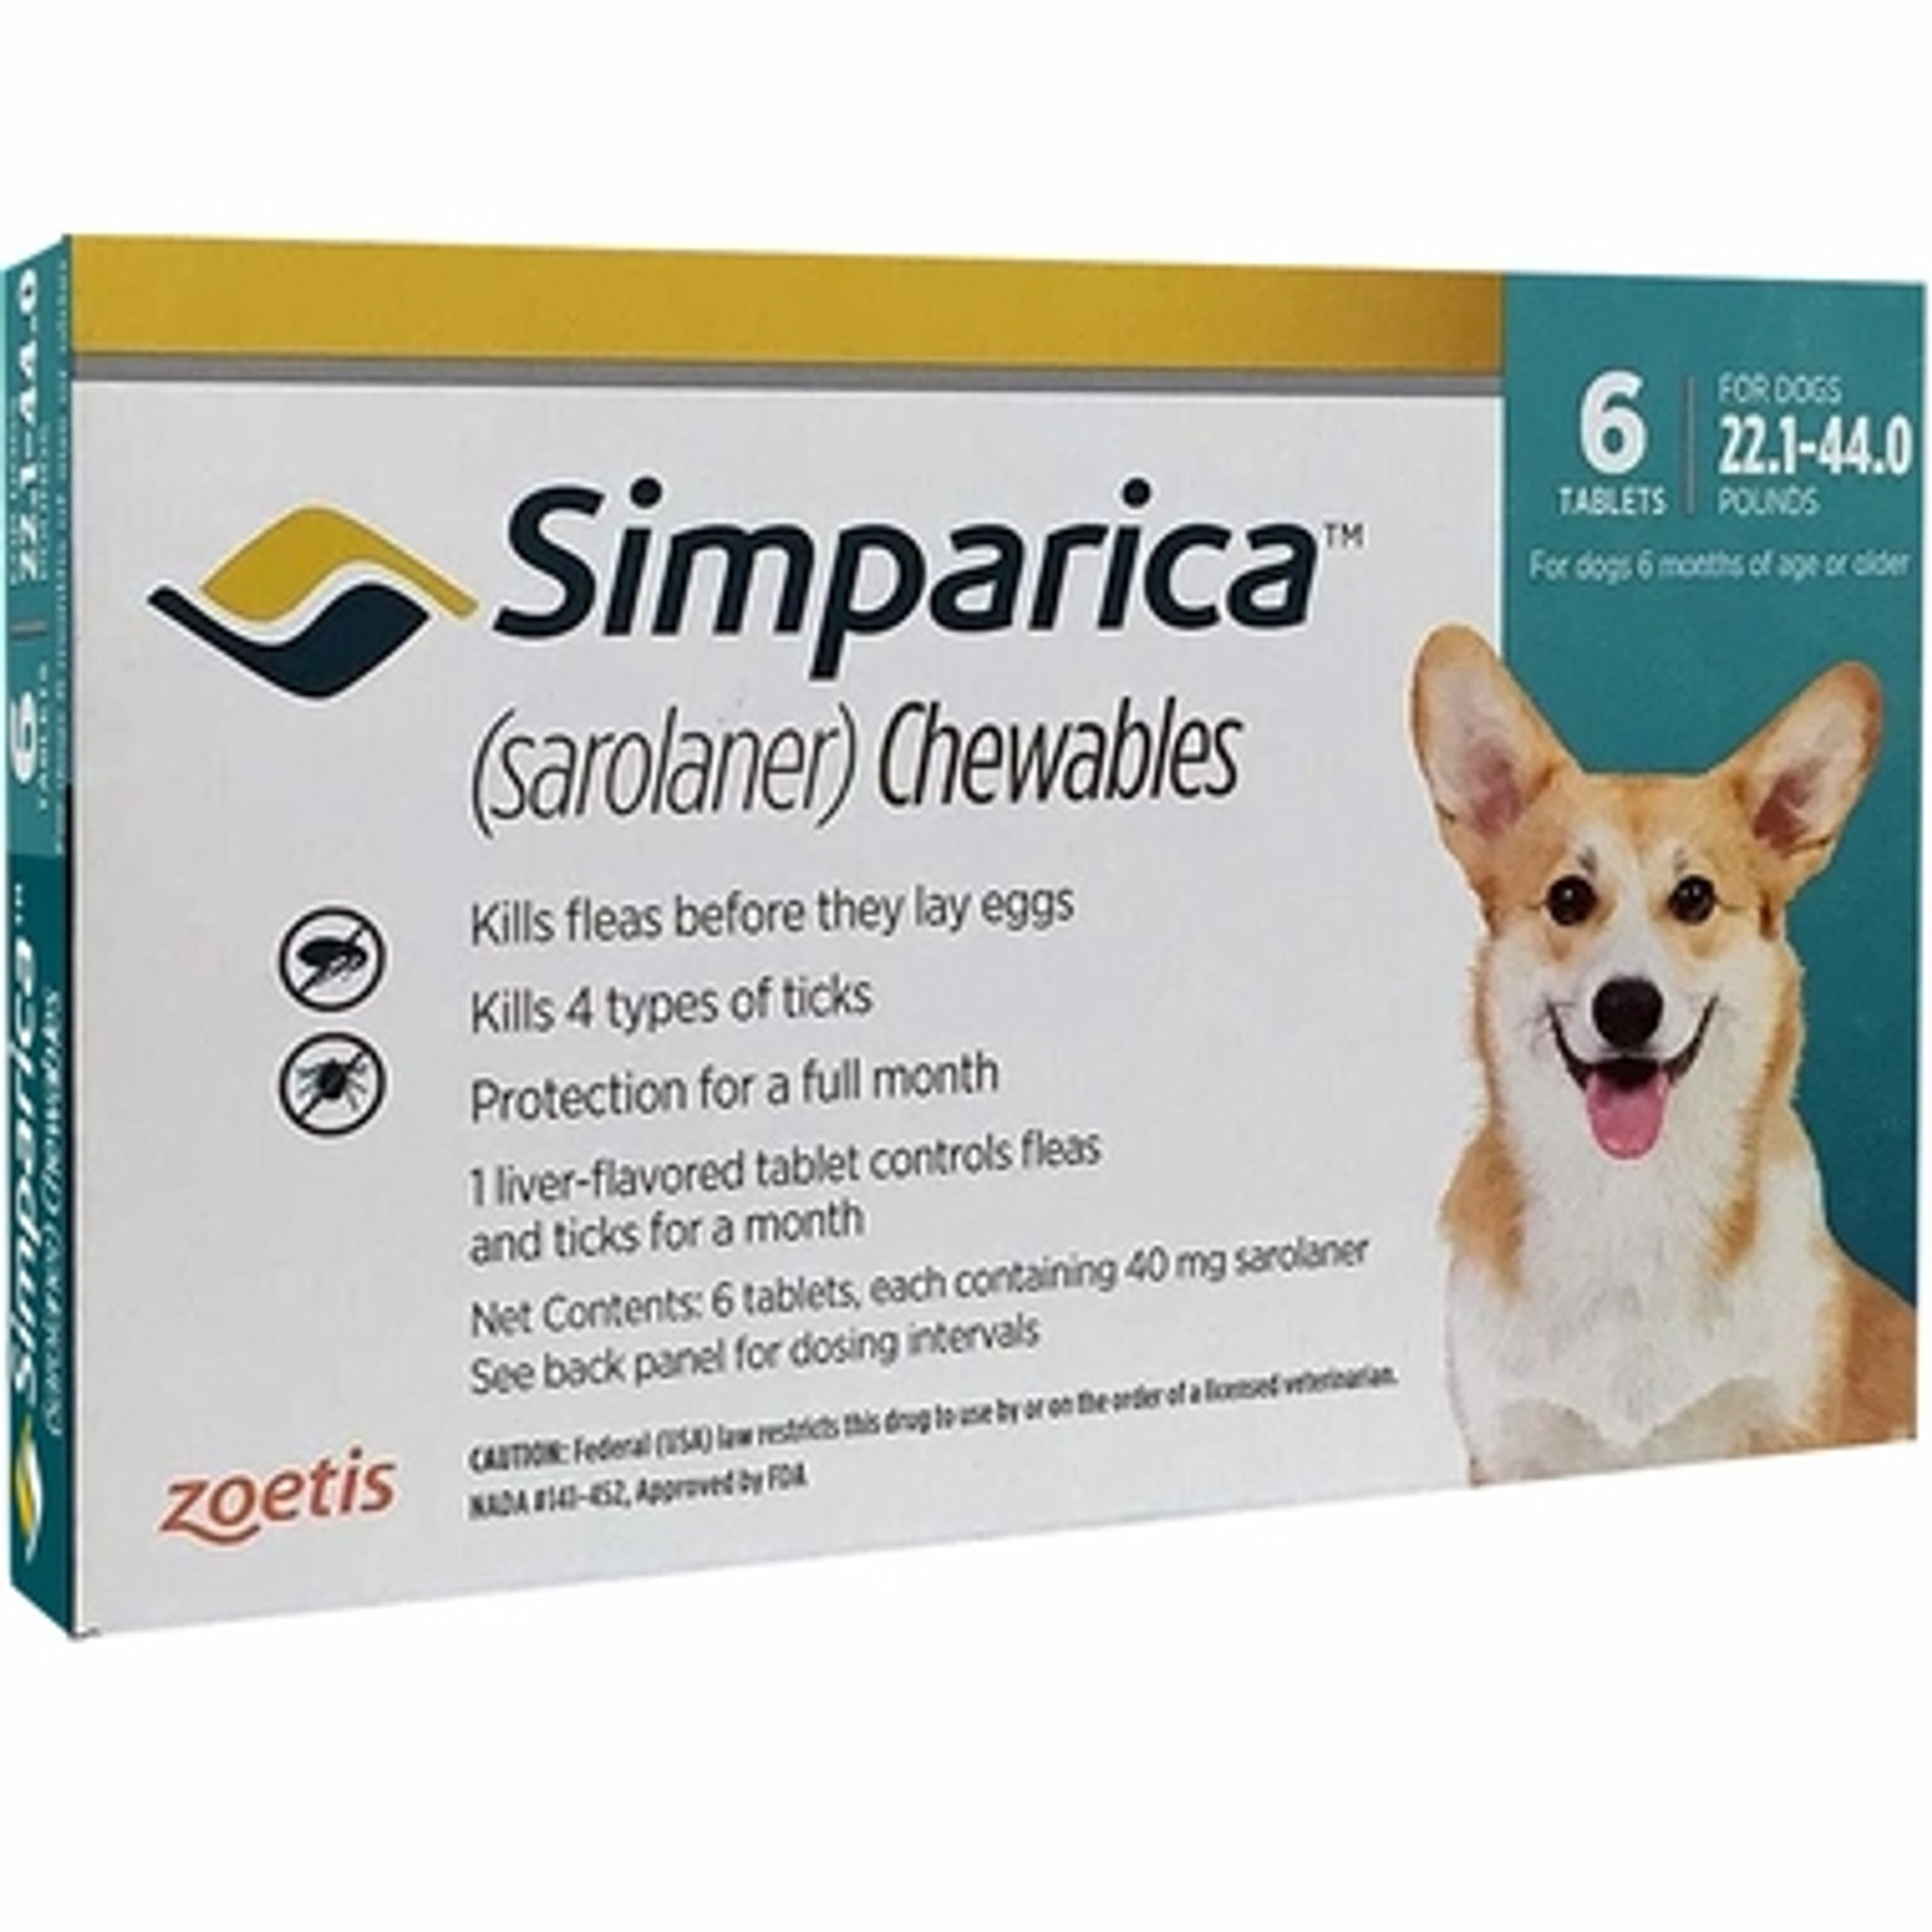 Simparica Chews for Dogs 22-44 lbs (10.1-20 kg) Blue 6 Chews Pet Meds